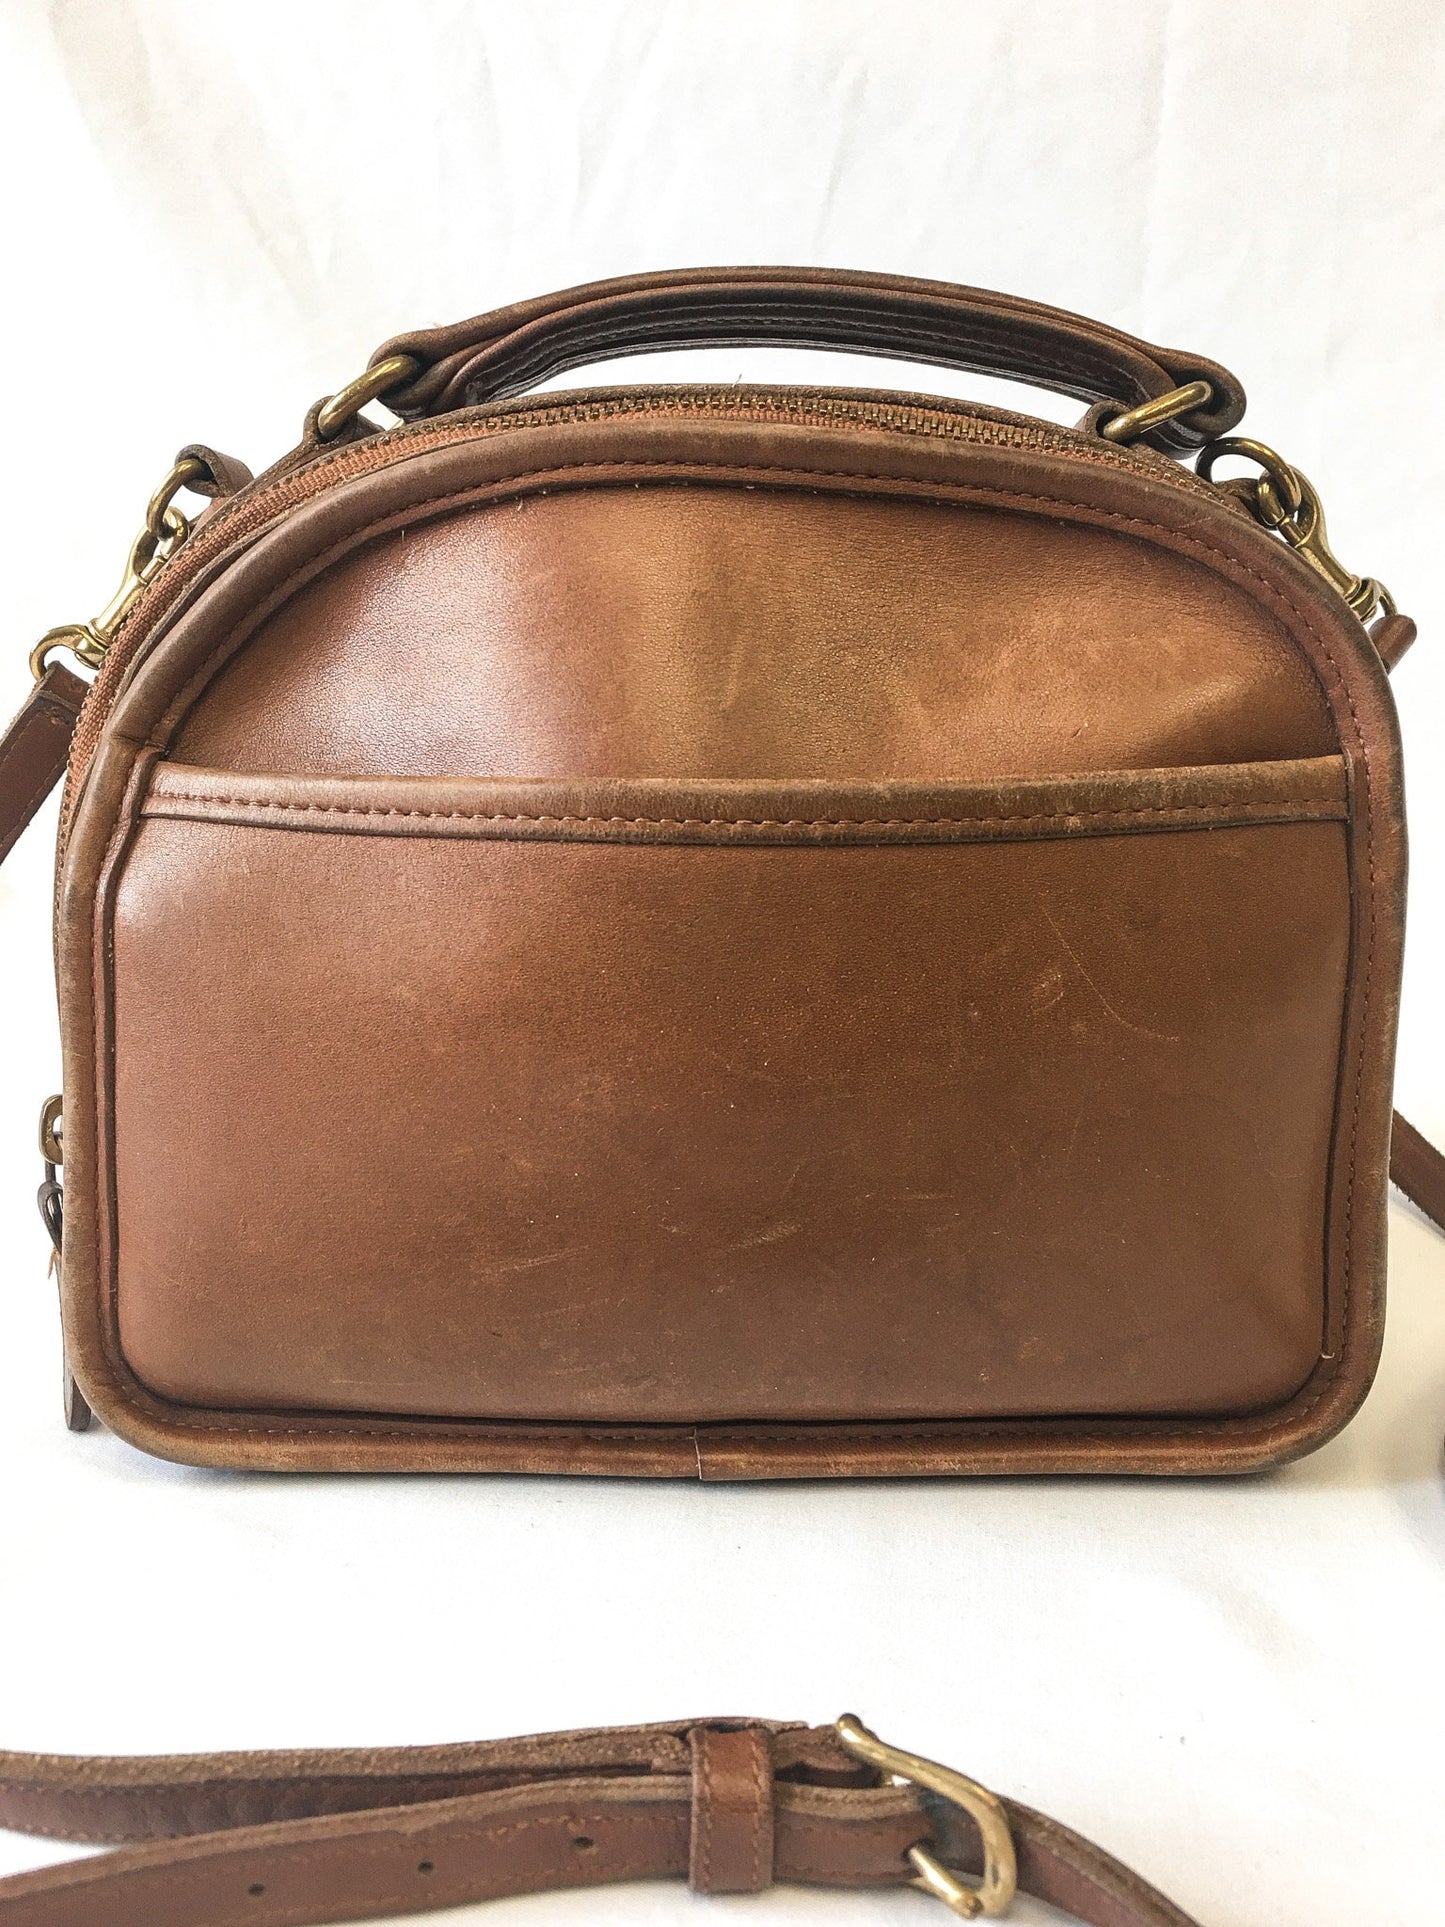 Vintage COACH Brown Leather Classic Lunch Box Top Handle/Crossbody Bag, Style #9991, Vintage RARE COACH Purse